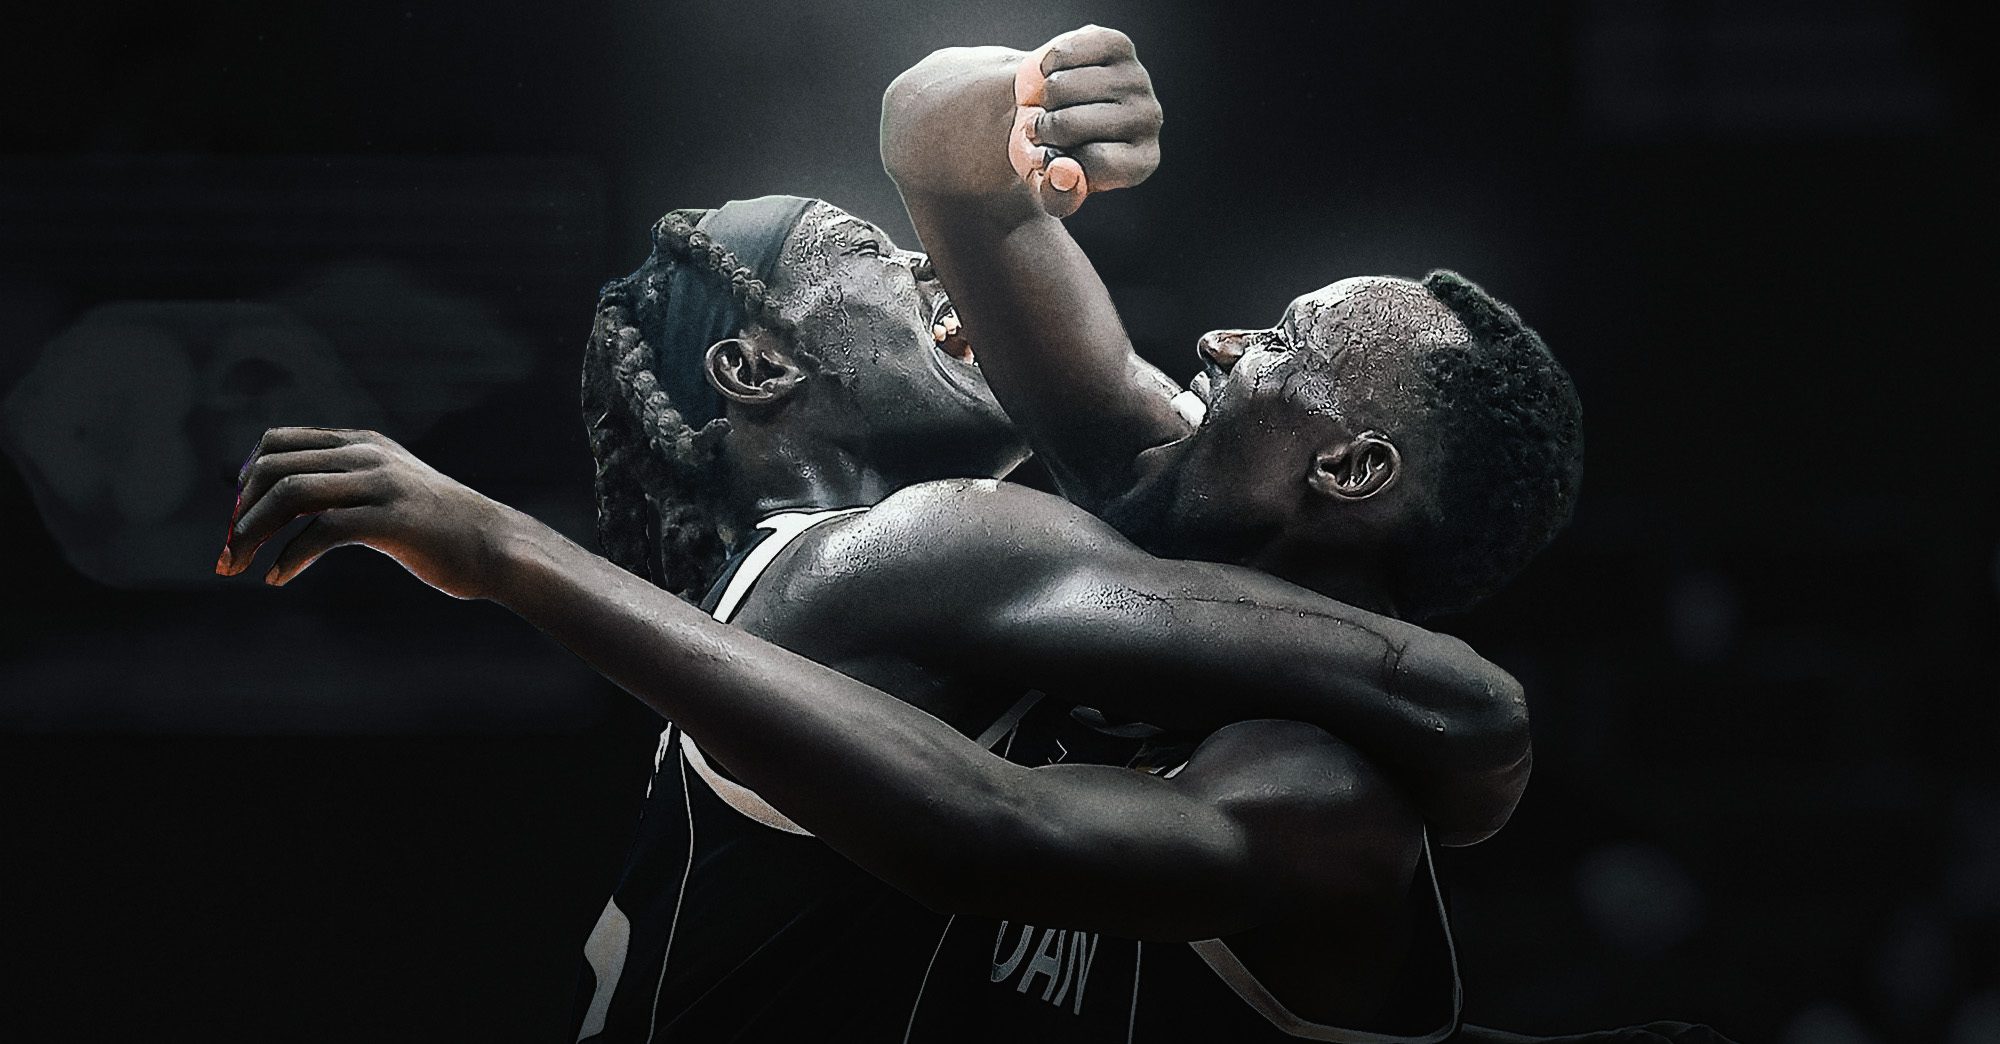 ‘It Still Doesn’t Feel Real’: Inside South Sudan’s Unlikely Run to the Olympics